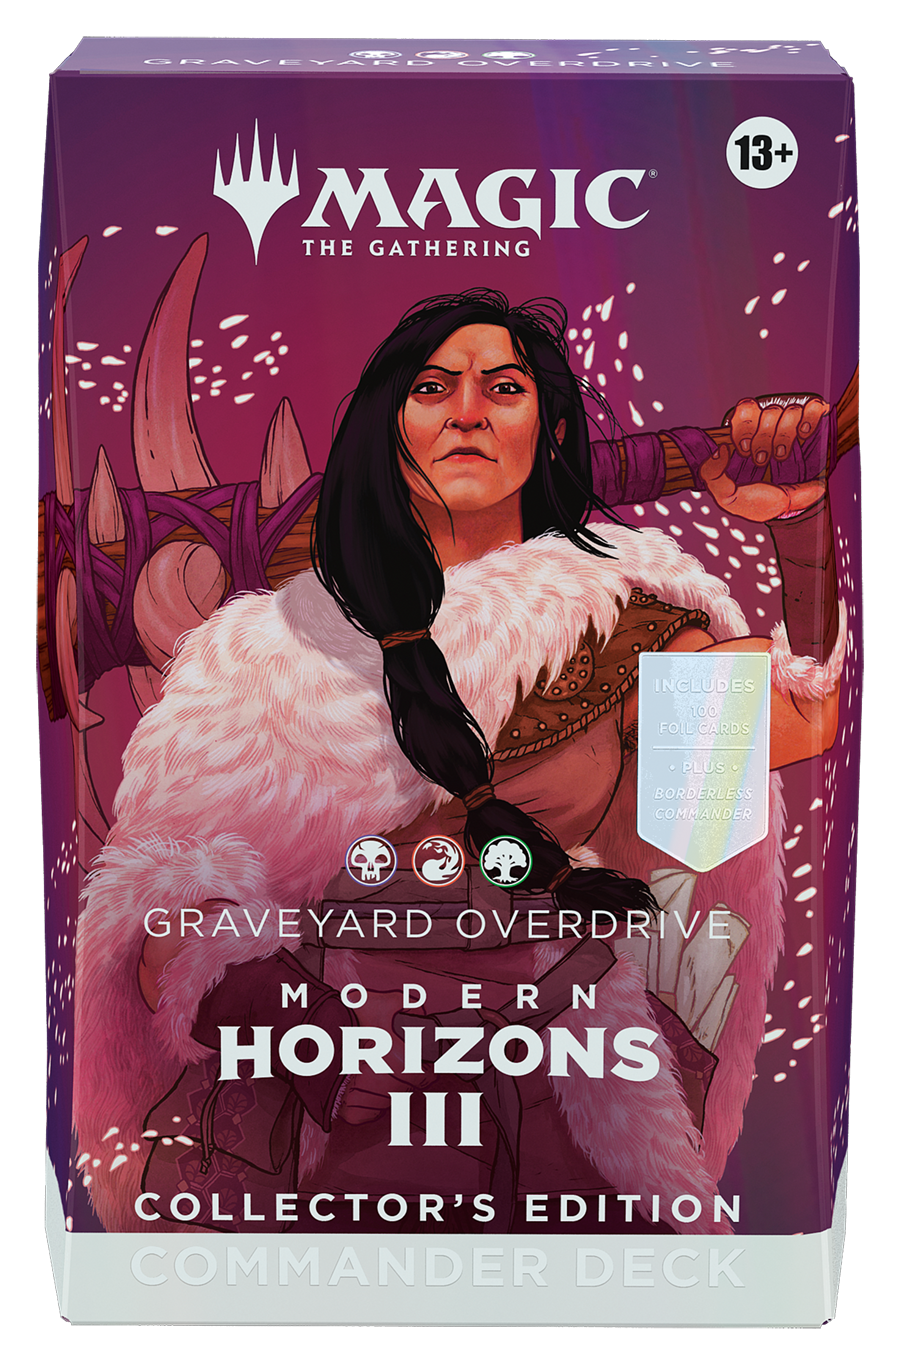 Magic The Gathering: Modern Horizons 3 Commander Deck Collector's Edition - Graveyard Overdrive